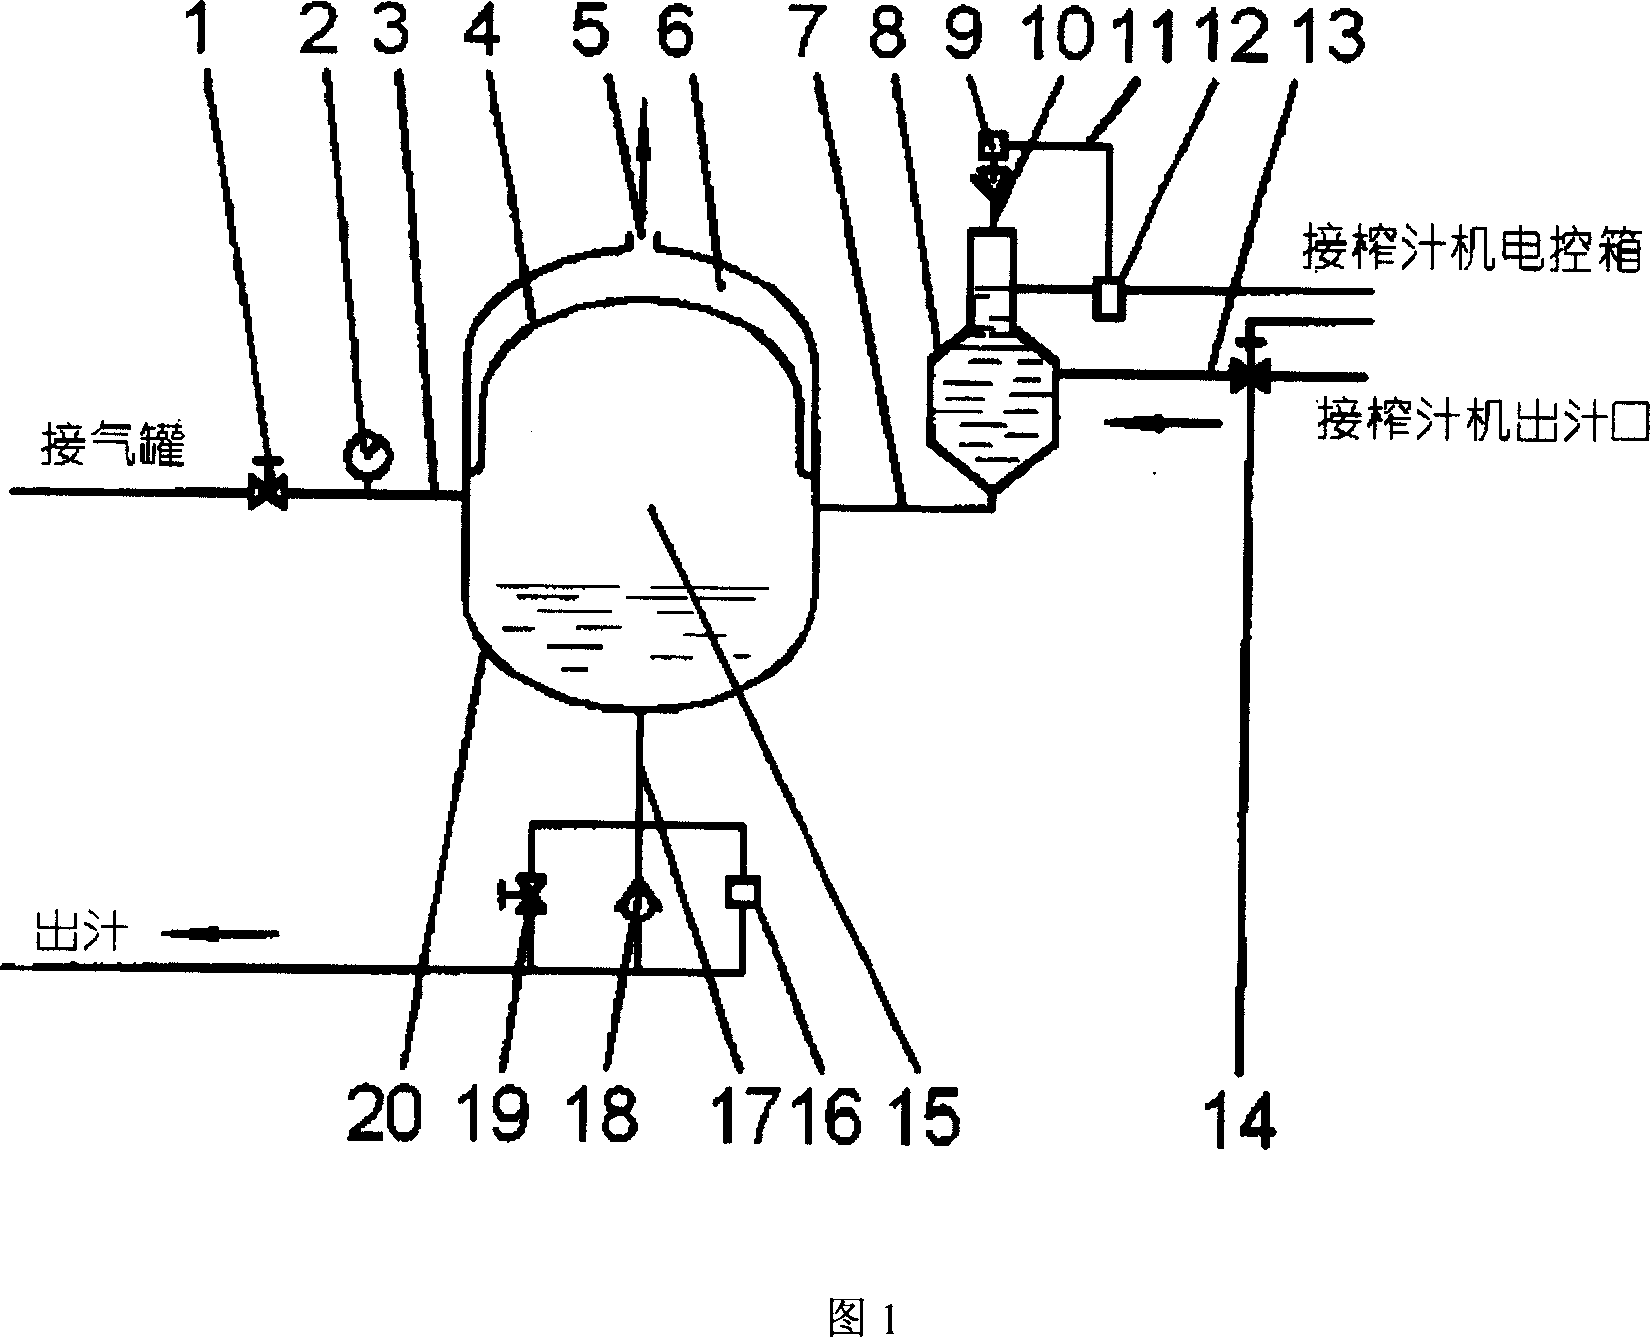 System for the gas and liquid discharging and breathing system without oxygen for cylinder type juice extractor